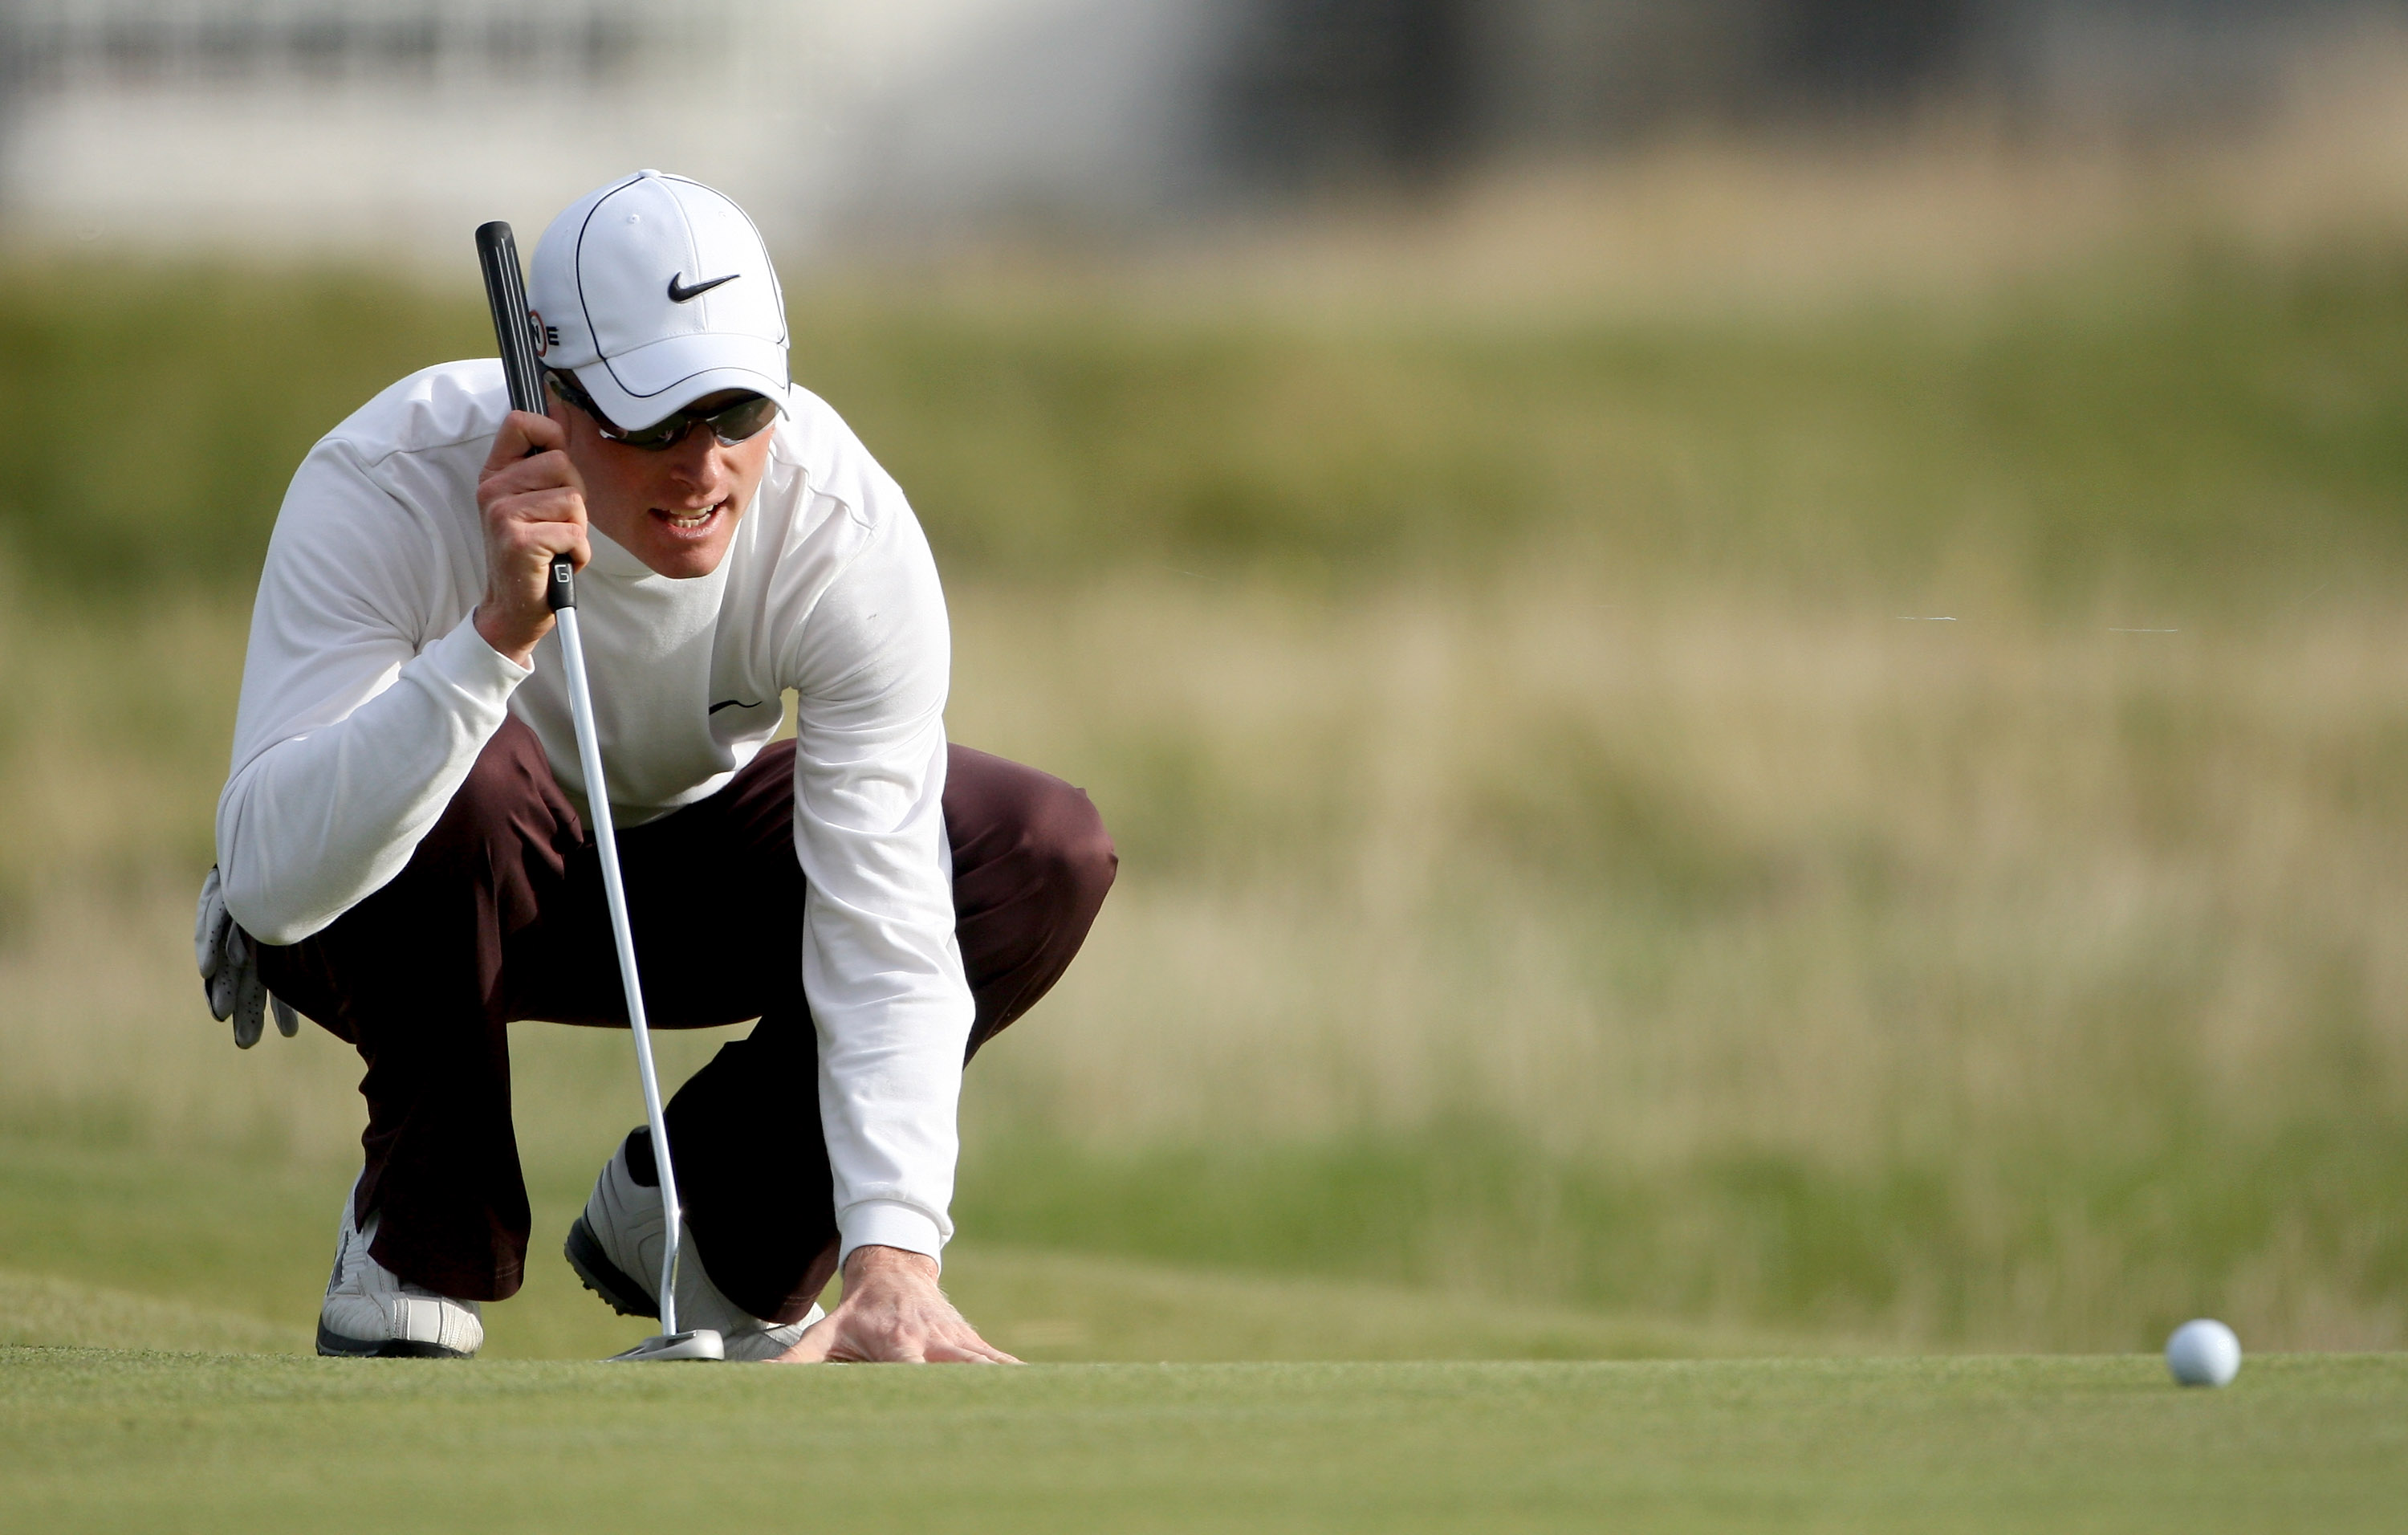 Spend time reading your putts from different angles, says Simon Dyson (Photo: Getty Images)